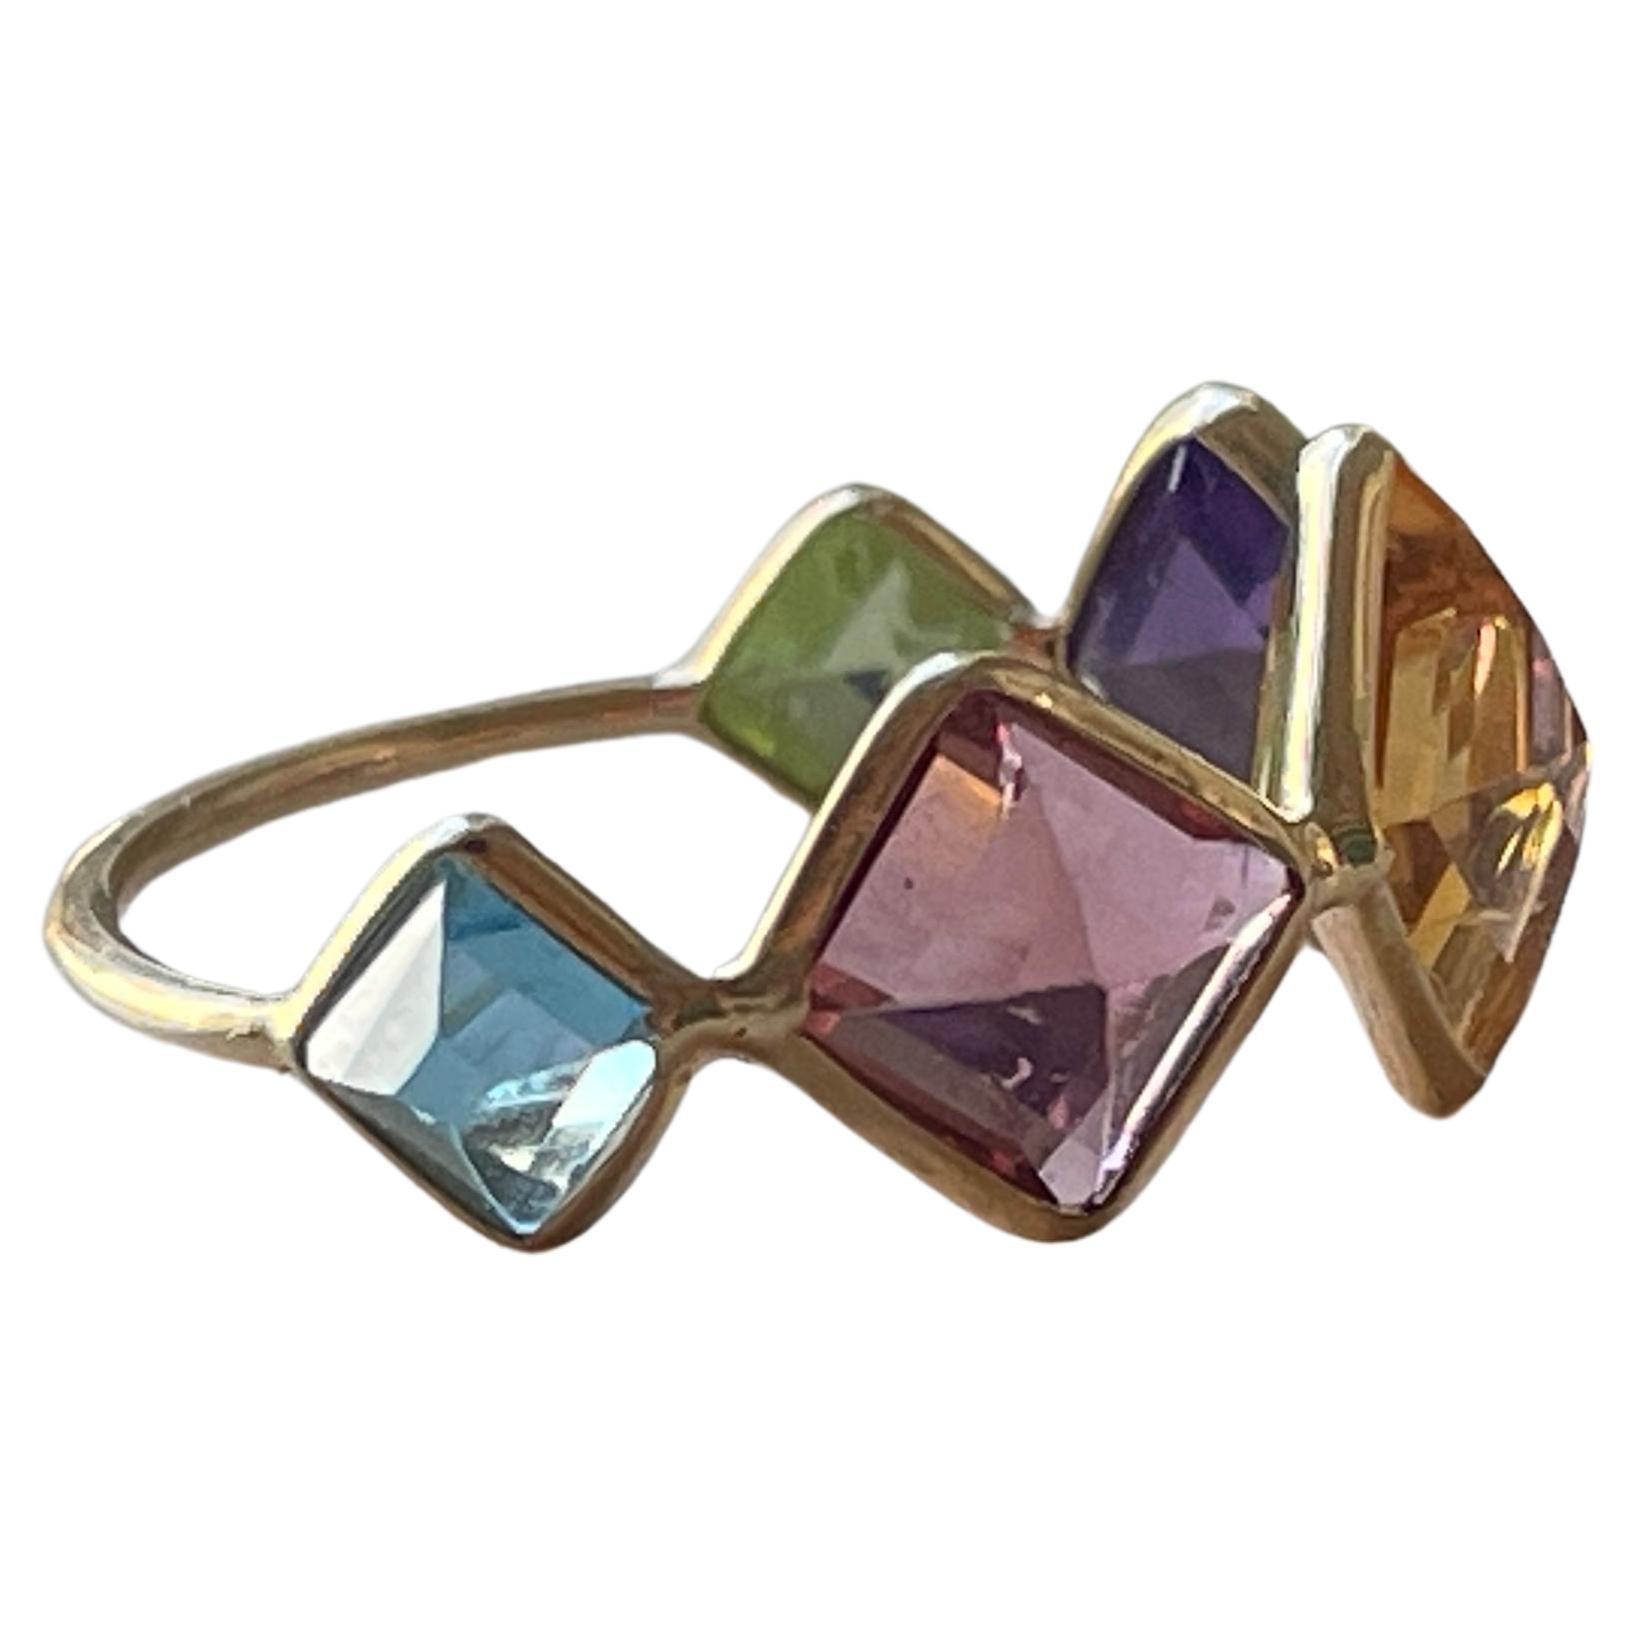 The beautiful ring is comprised of 5 Emerald Cut gemstones including, Aquamarine, Pink Tourmaline, Yellow Tourmaline, Amethyst, & Peridot. The Gemstones are set upside down in 18k gold bezel allowing for the point of the stone to be on the top of